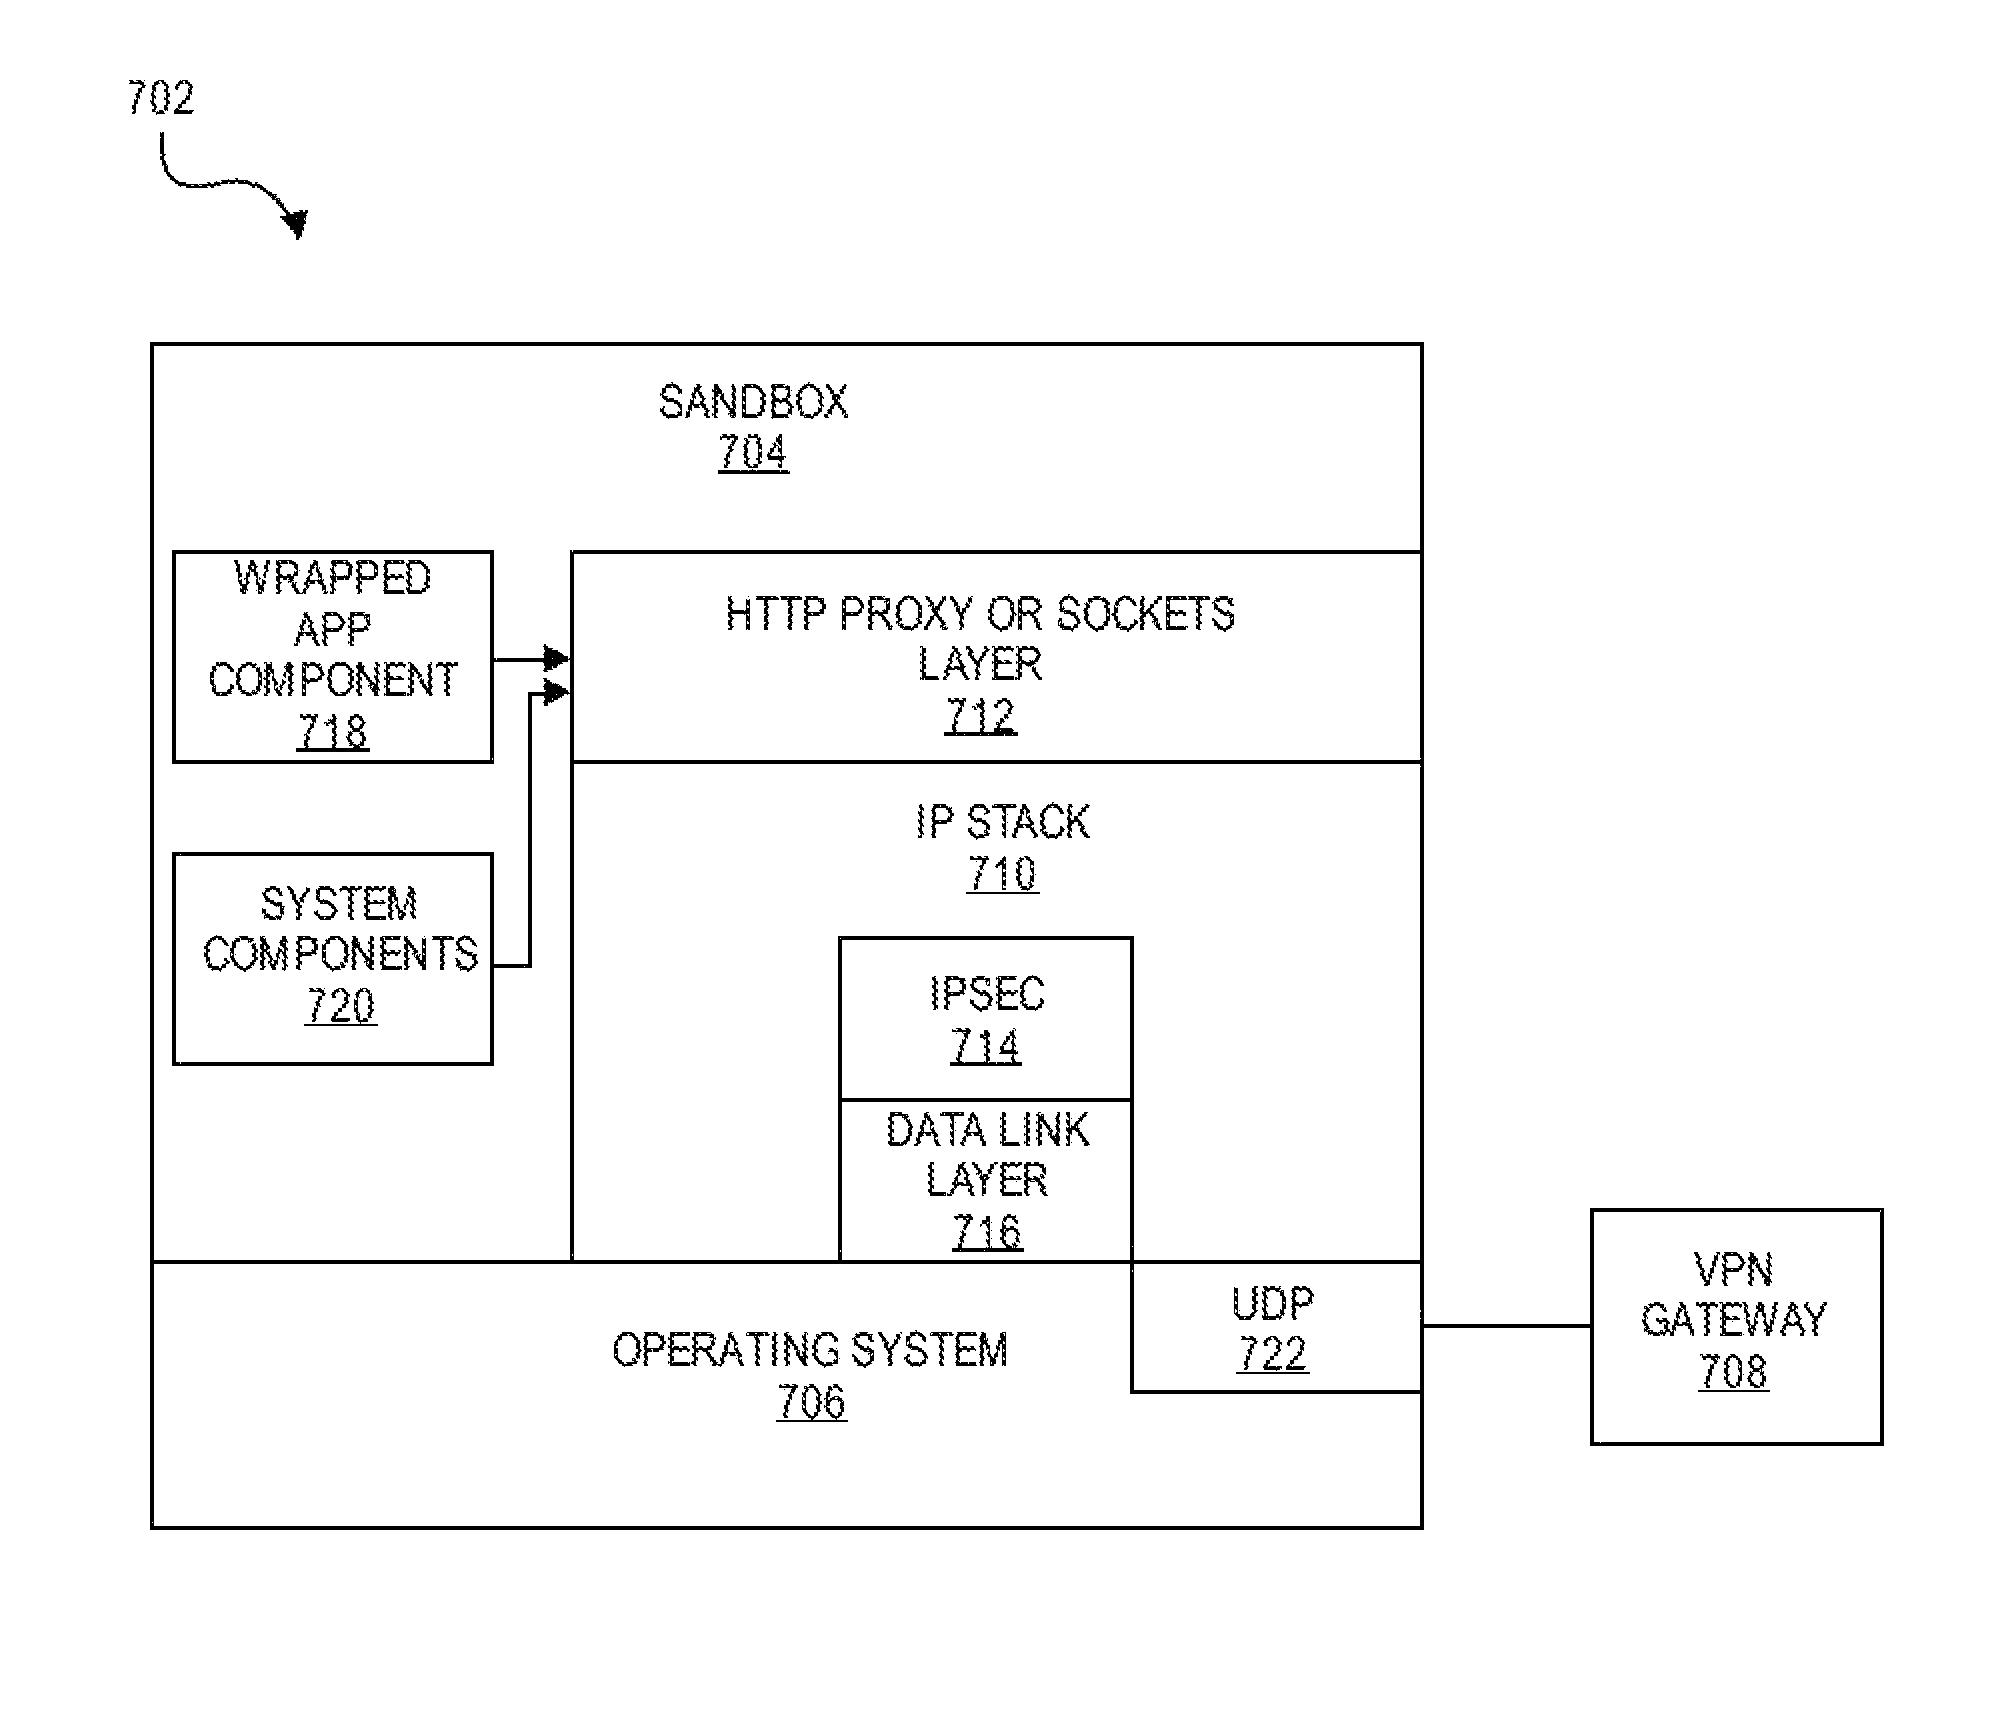 Creating a virtual private network (VPN) for a single app on an internet-enabled device or system